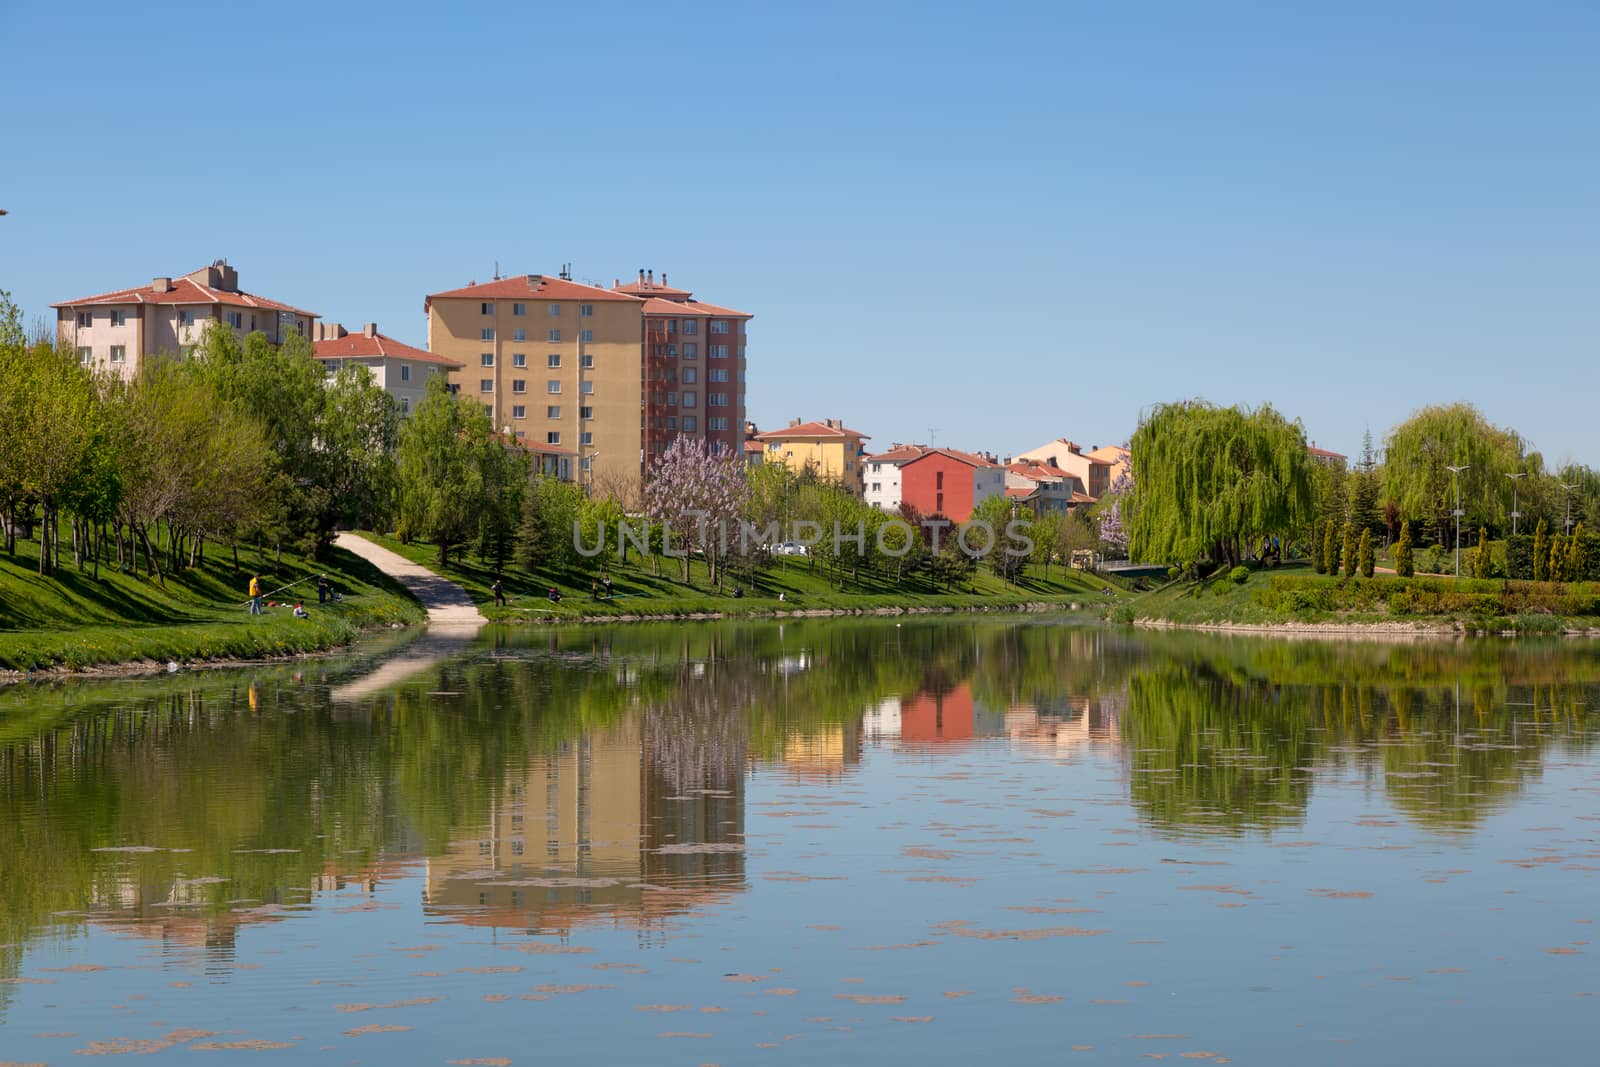 Landscape view of Porsuk River along Eskisehir with meadow area around, on bright blue sky background.